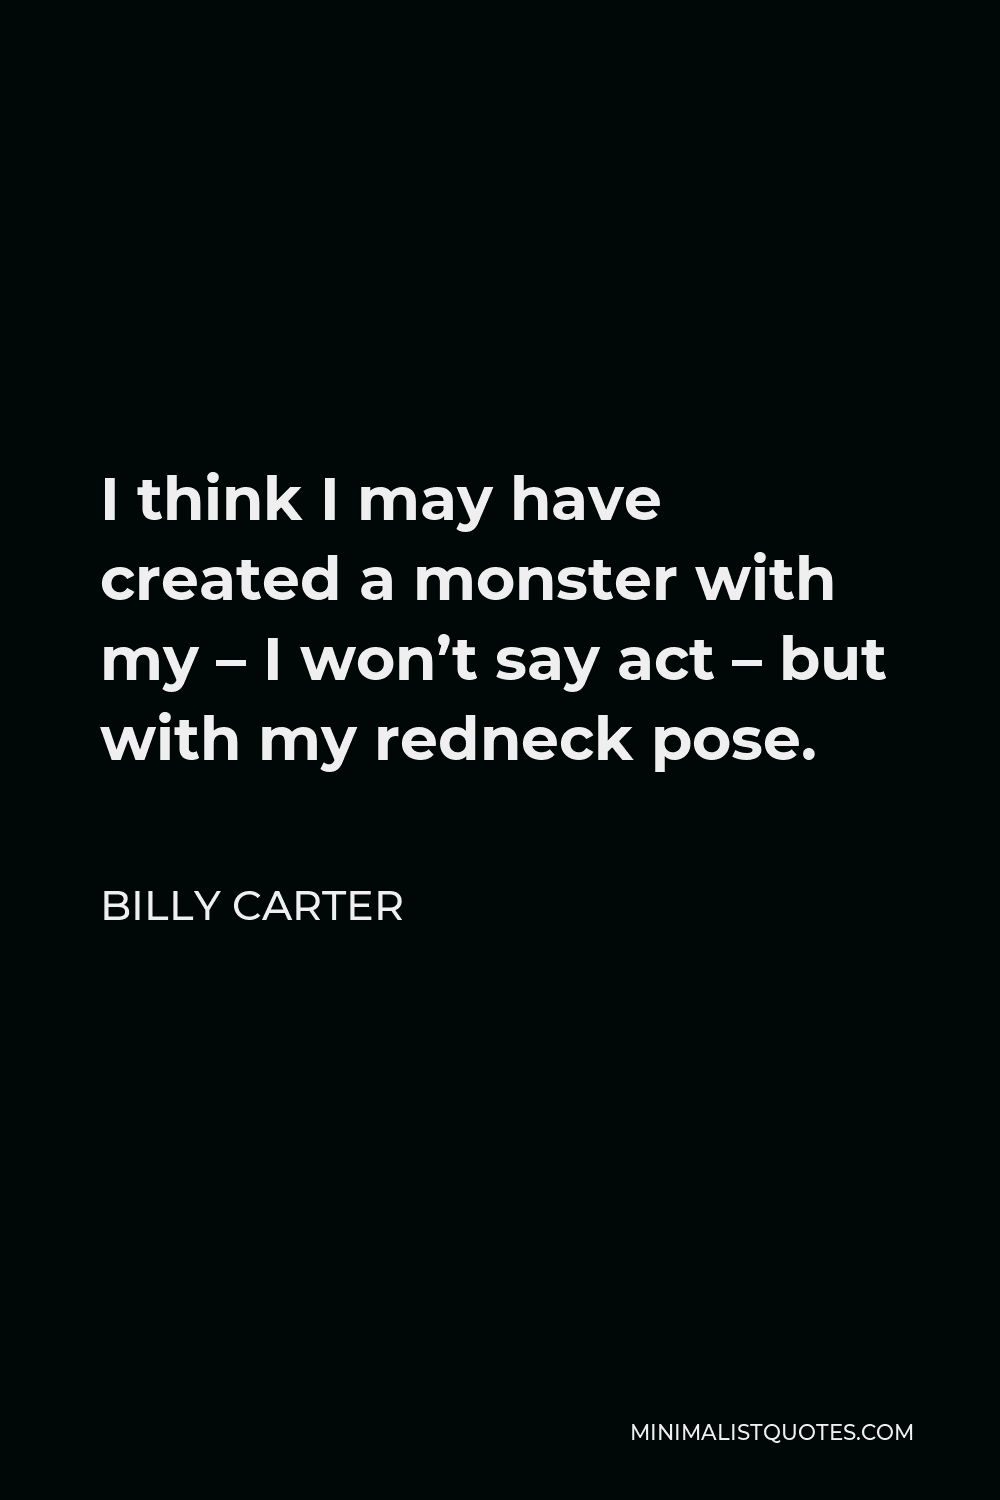 Billy Carter Quote - I think I may have created a monster with my – I won’t say act – but with my redneck pose.